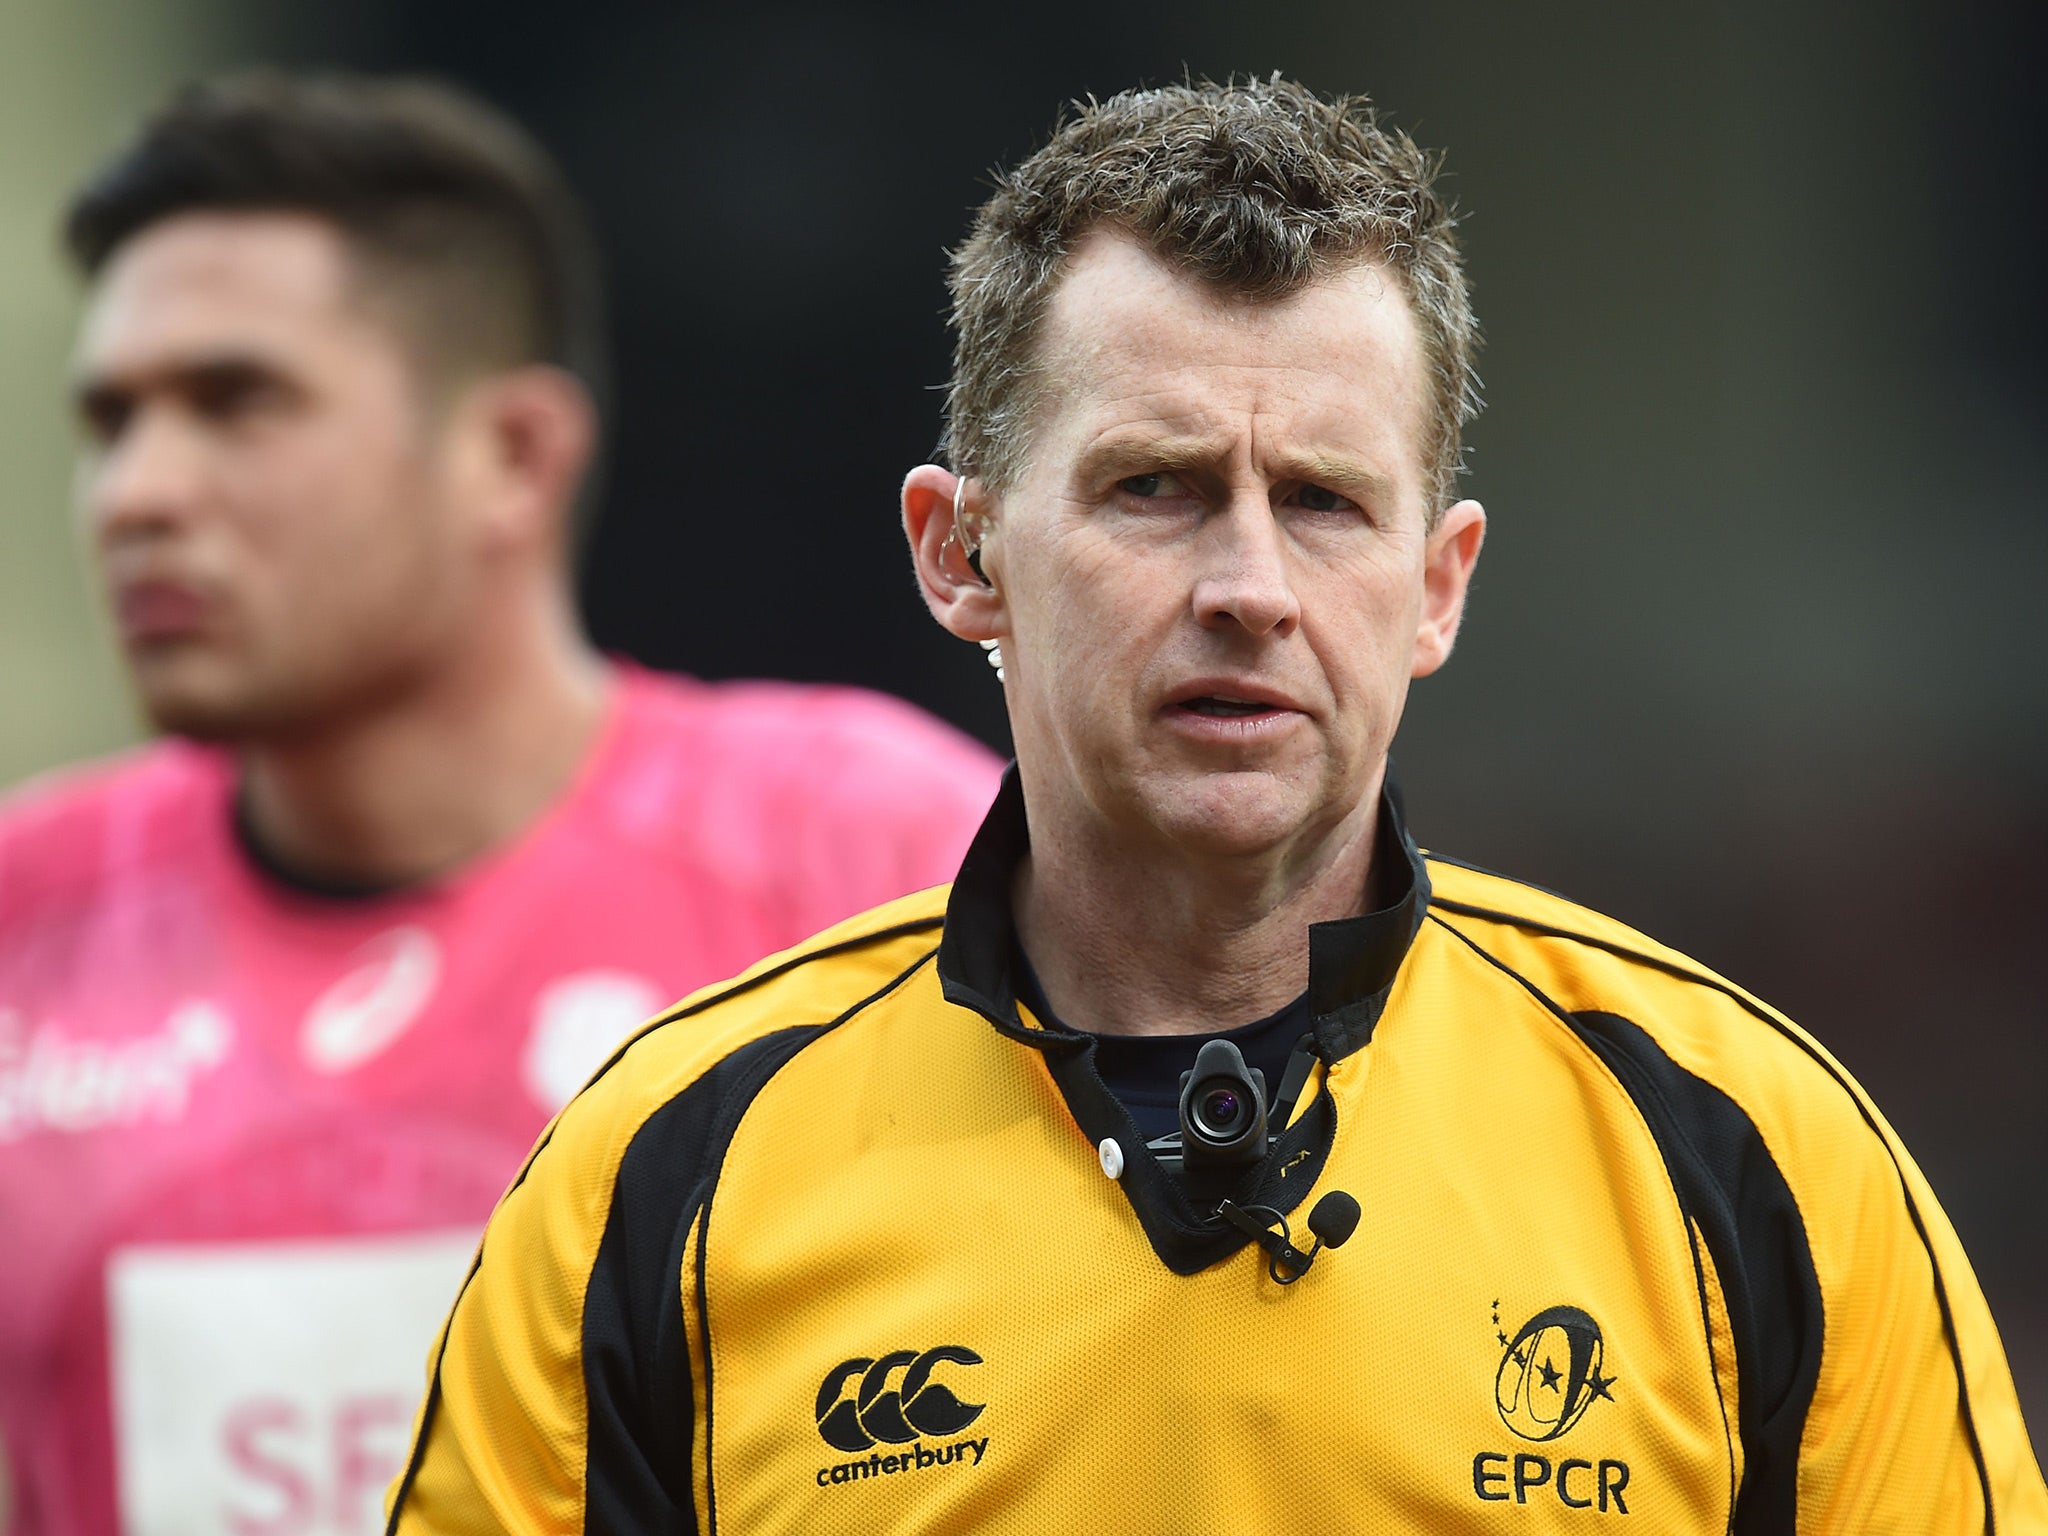 Nigel Owens revealed his sexuality felt "totally alien" to him